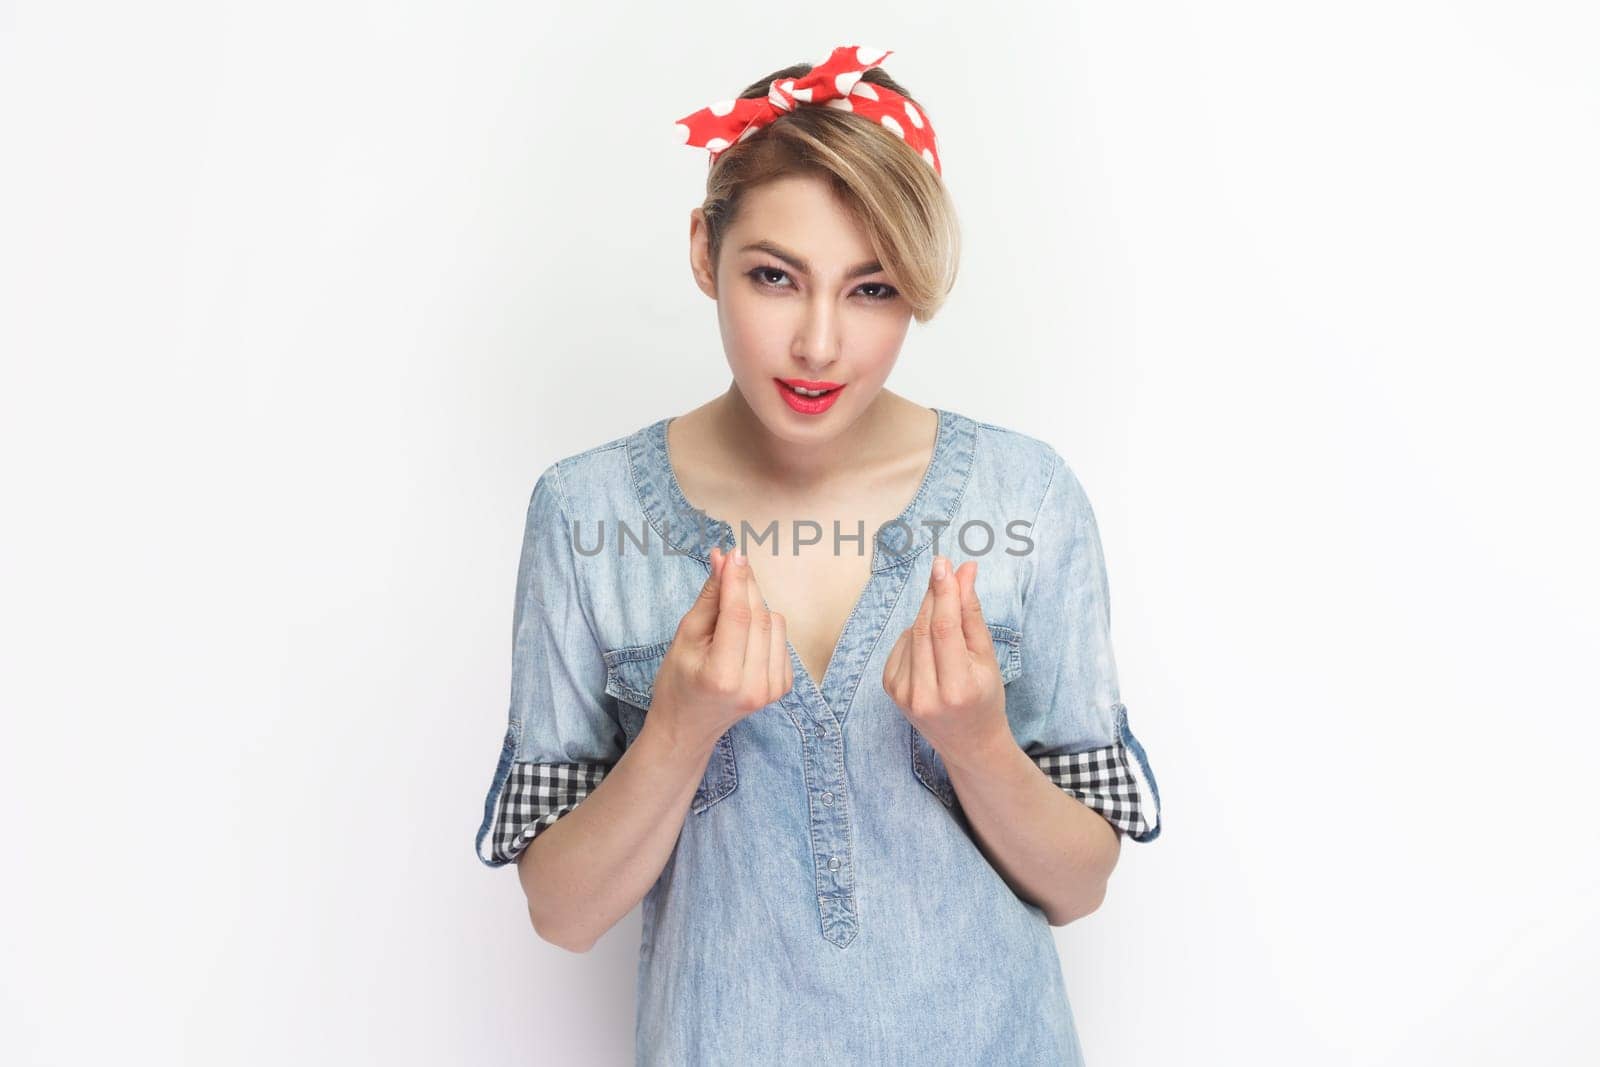 Attractive woman wearing blue denim shirt and red headband showing money gesture with fingers. by Khosro1